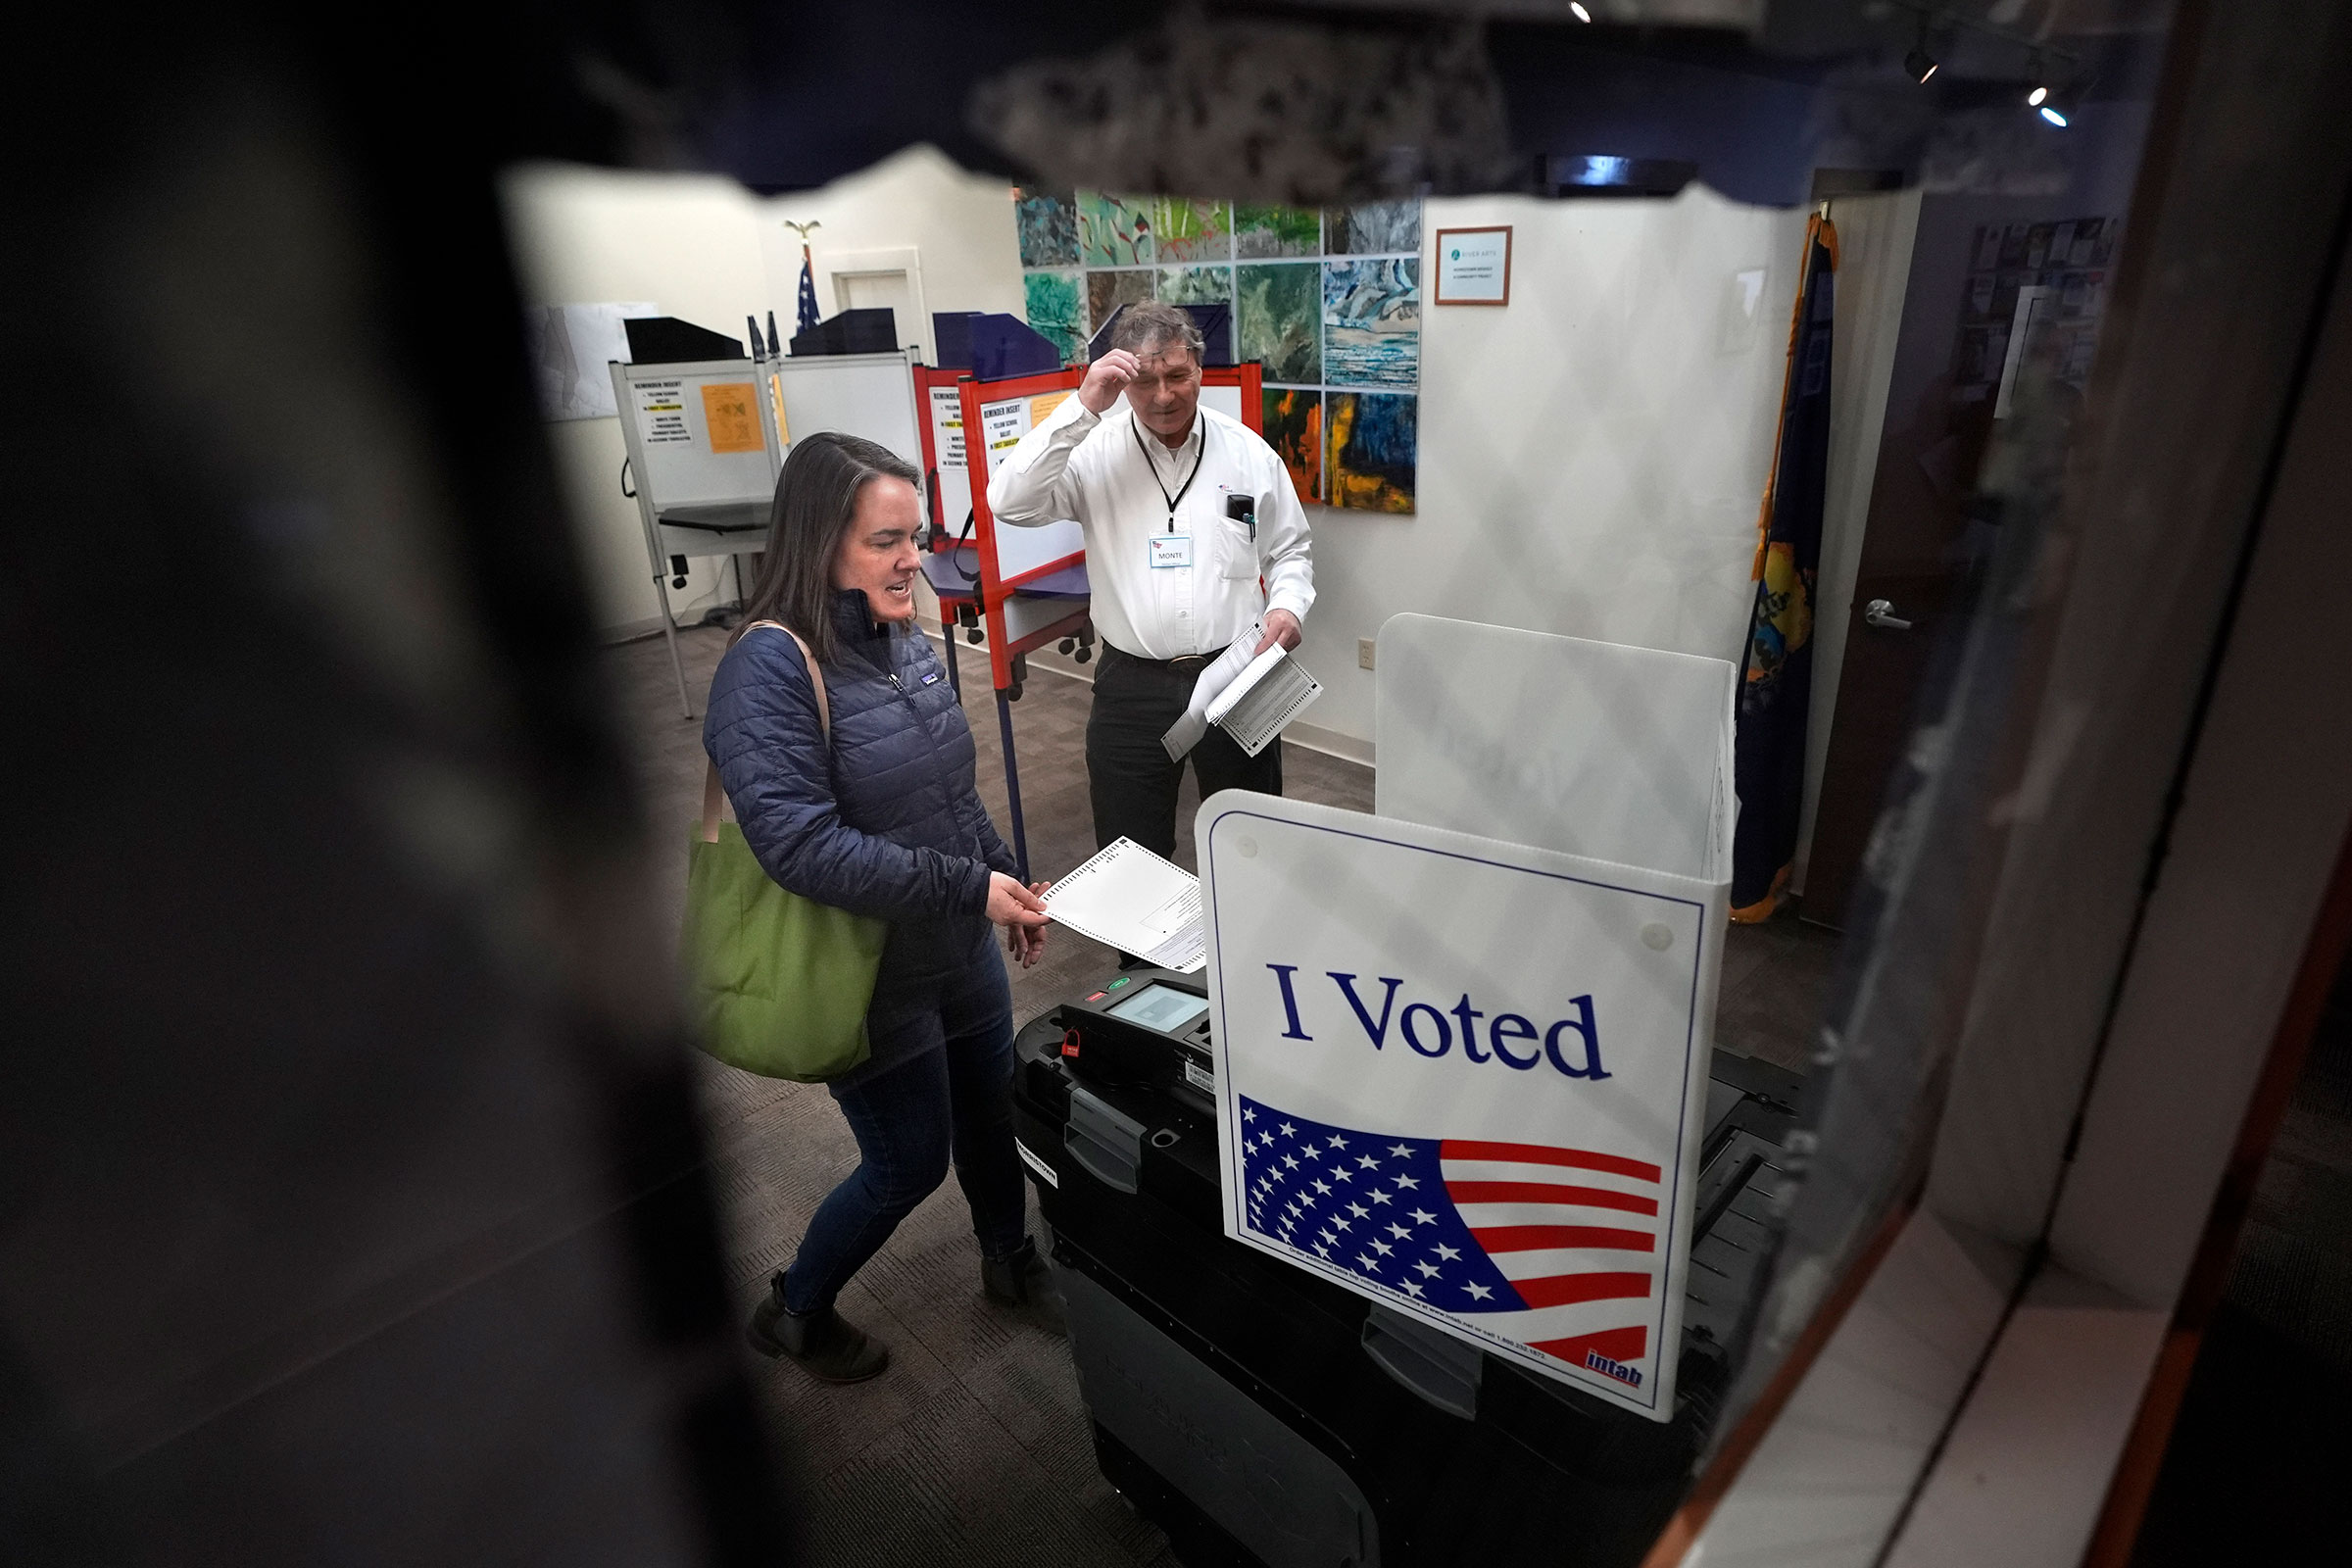 Amber Cutler casts her ballot as election official Monte Mason looks on during primary election voting on Tuesday at Morrisville town hall in Vermont.